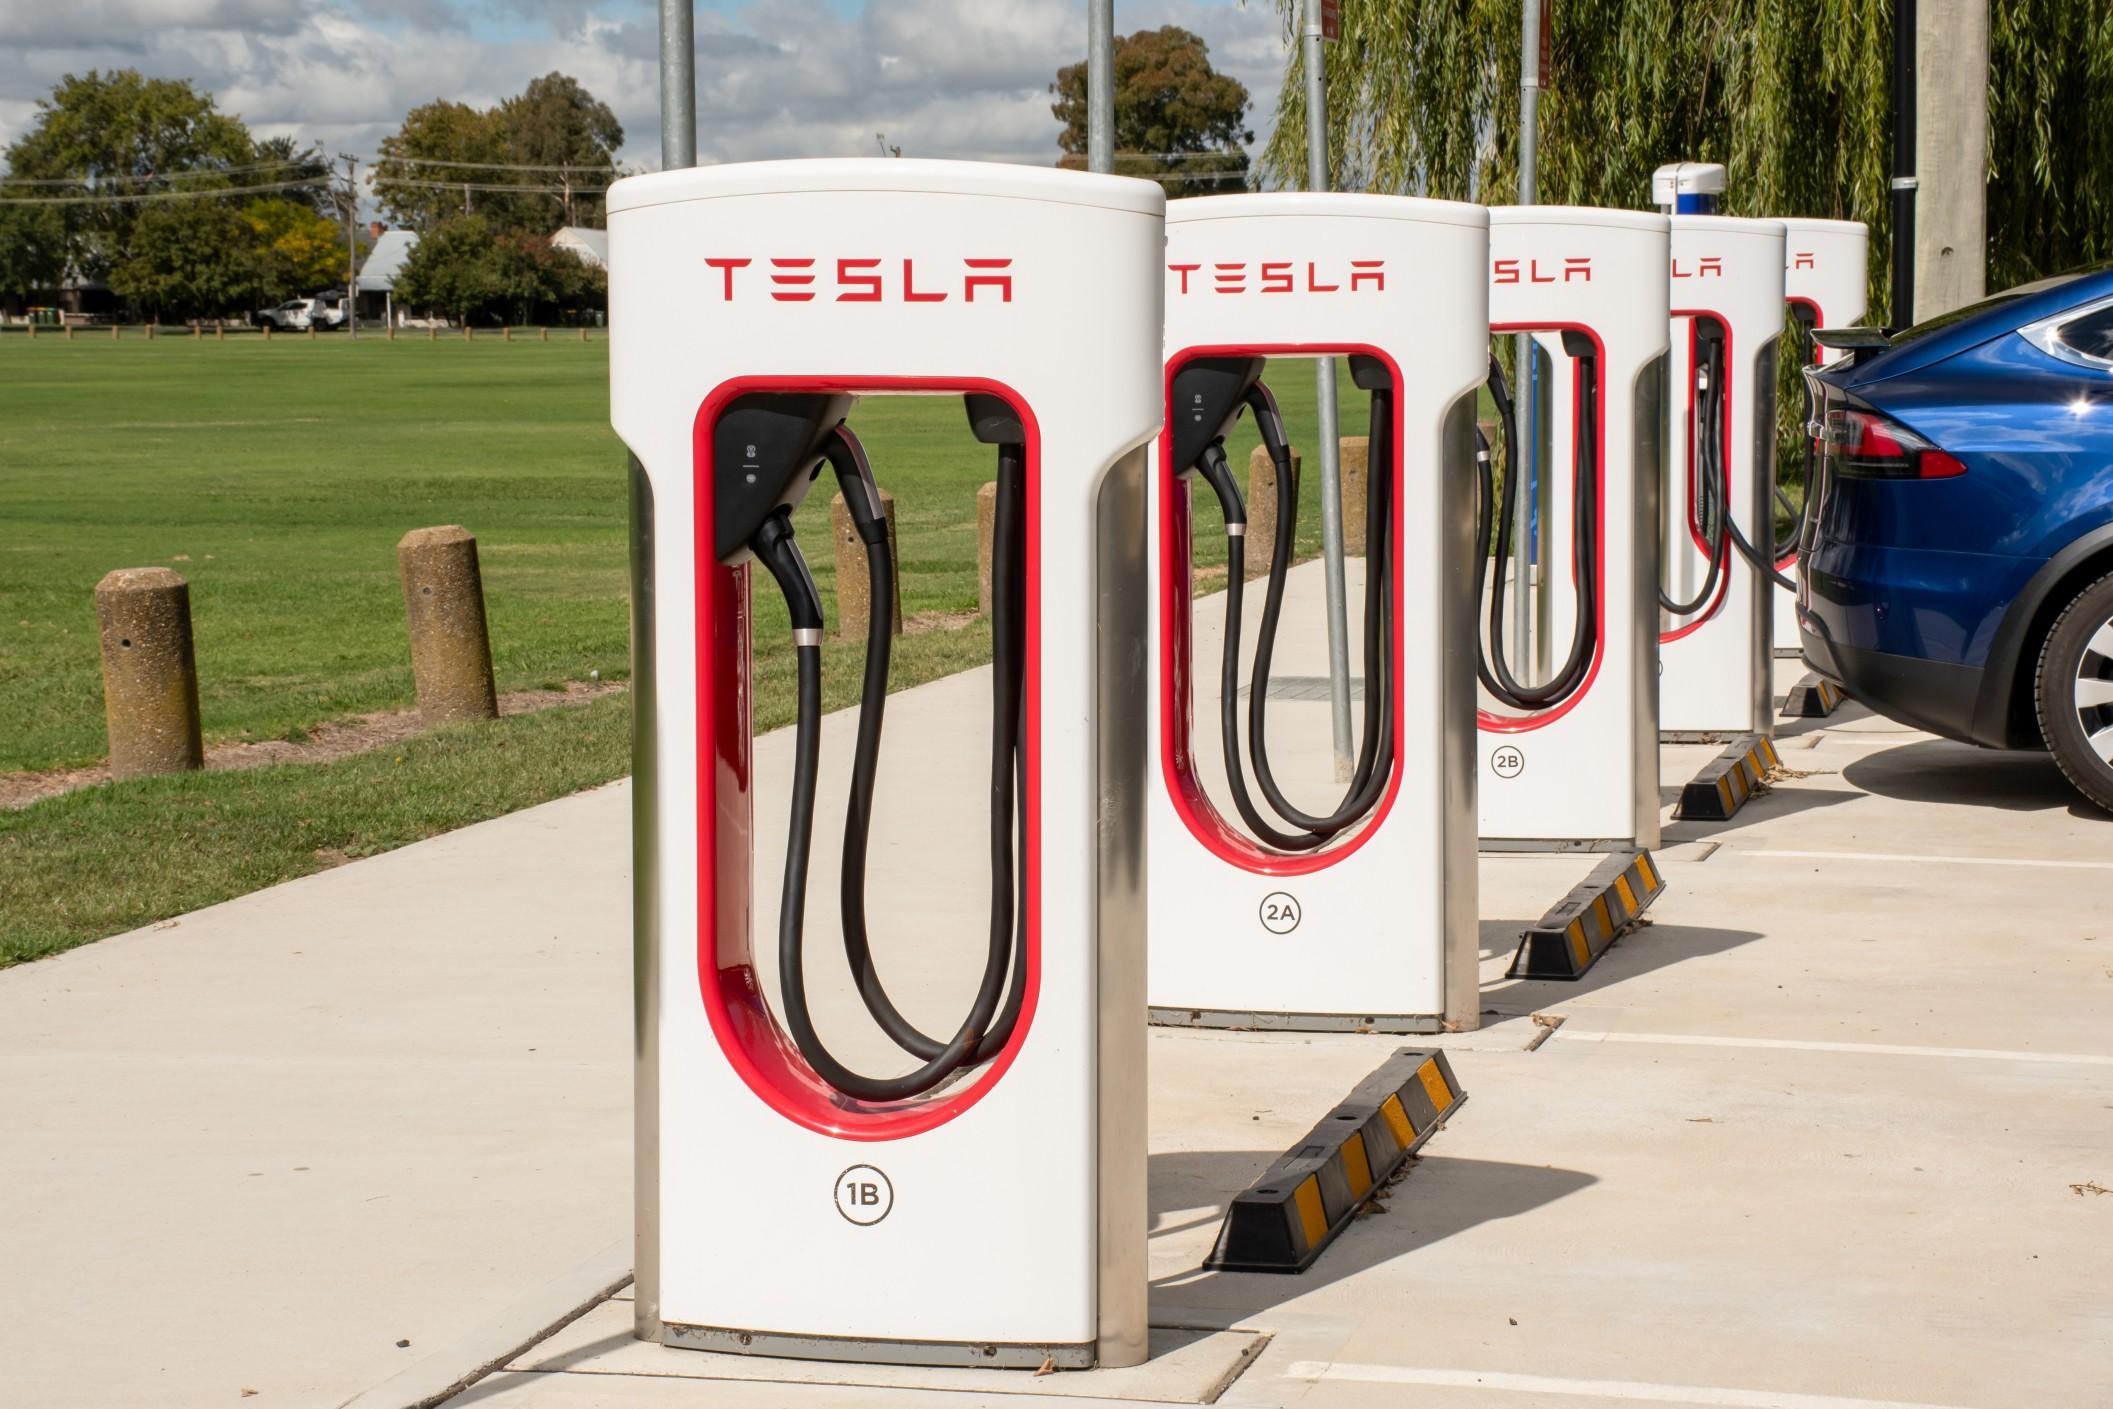 The Senate bill includes $7.5 billion for electric vehicle charging stations.